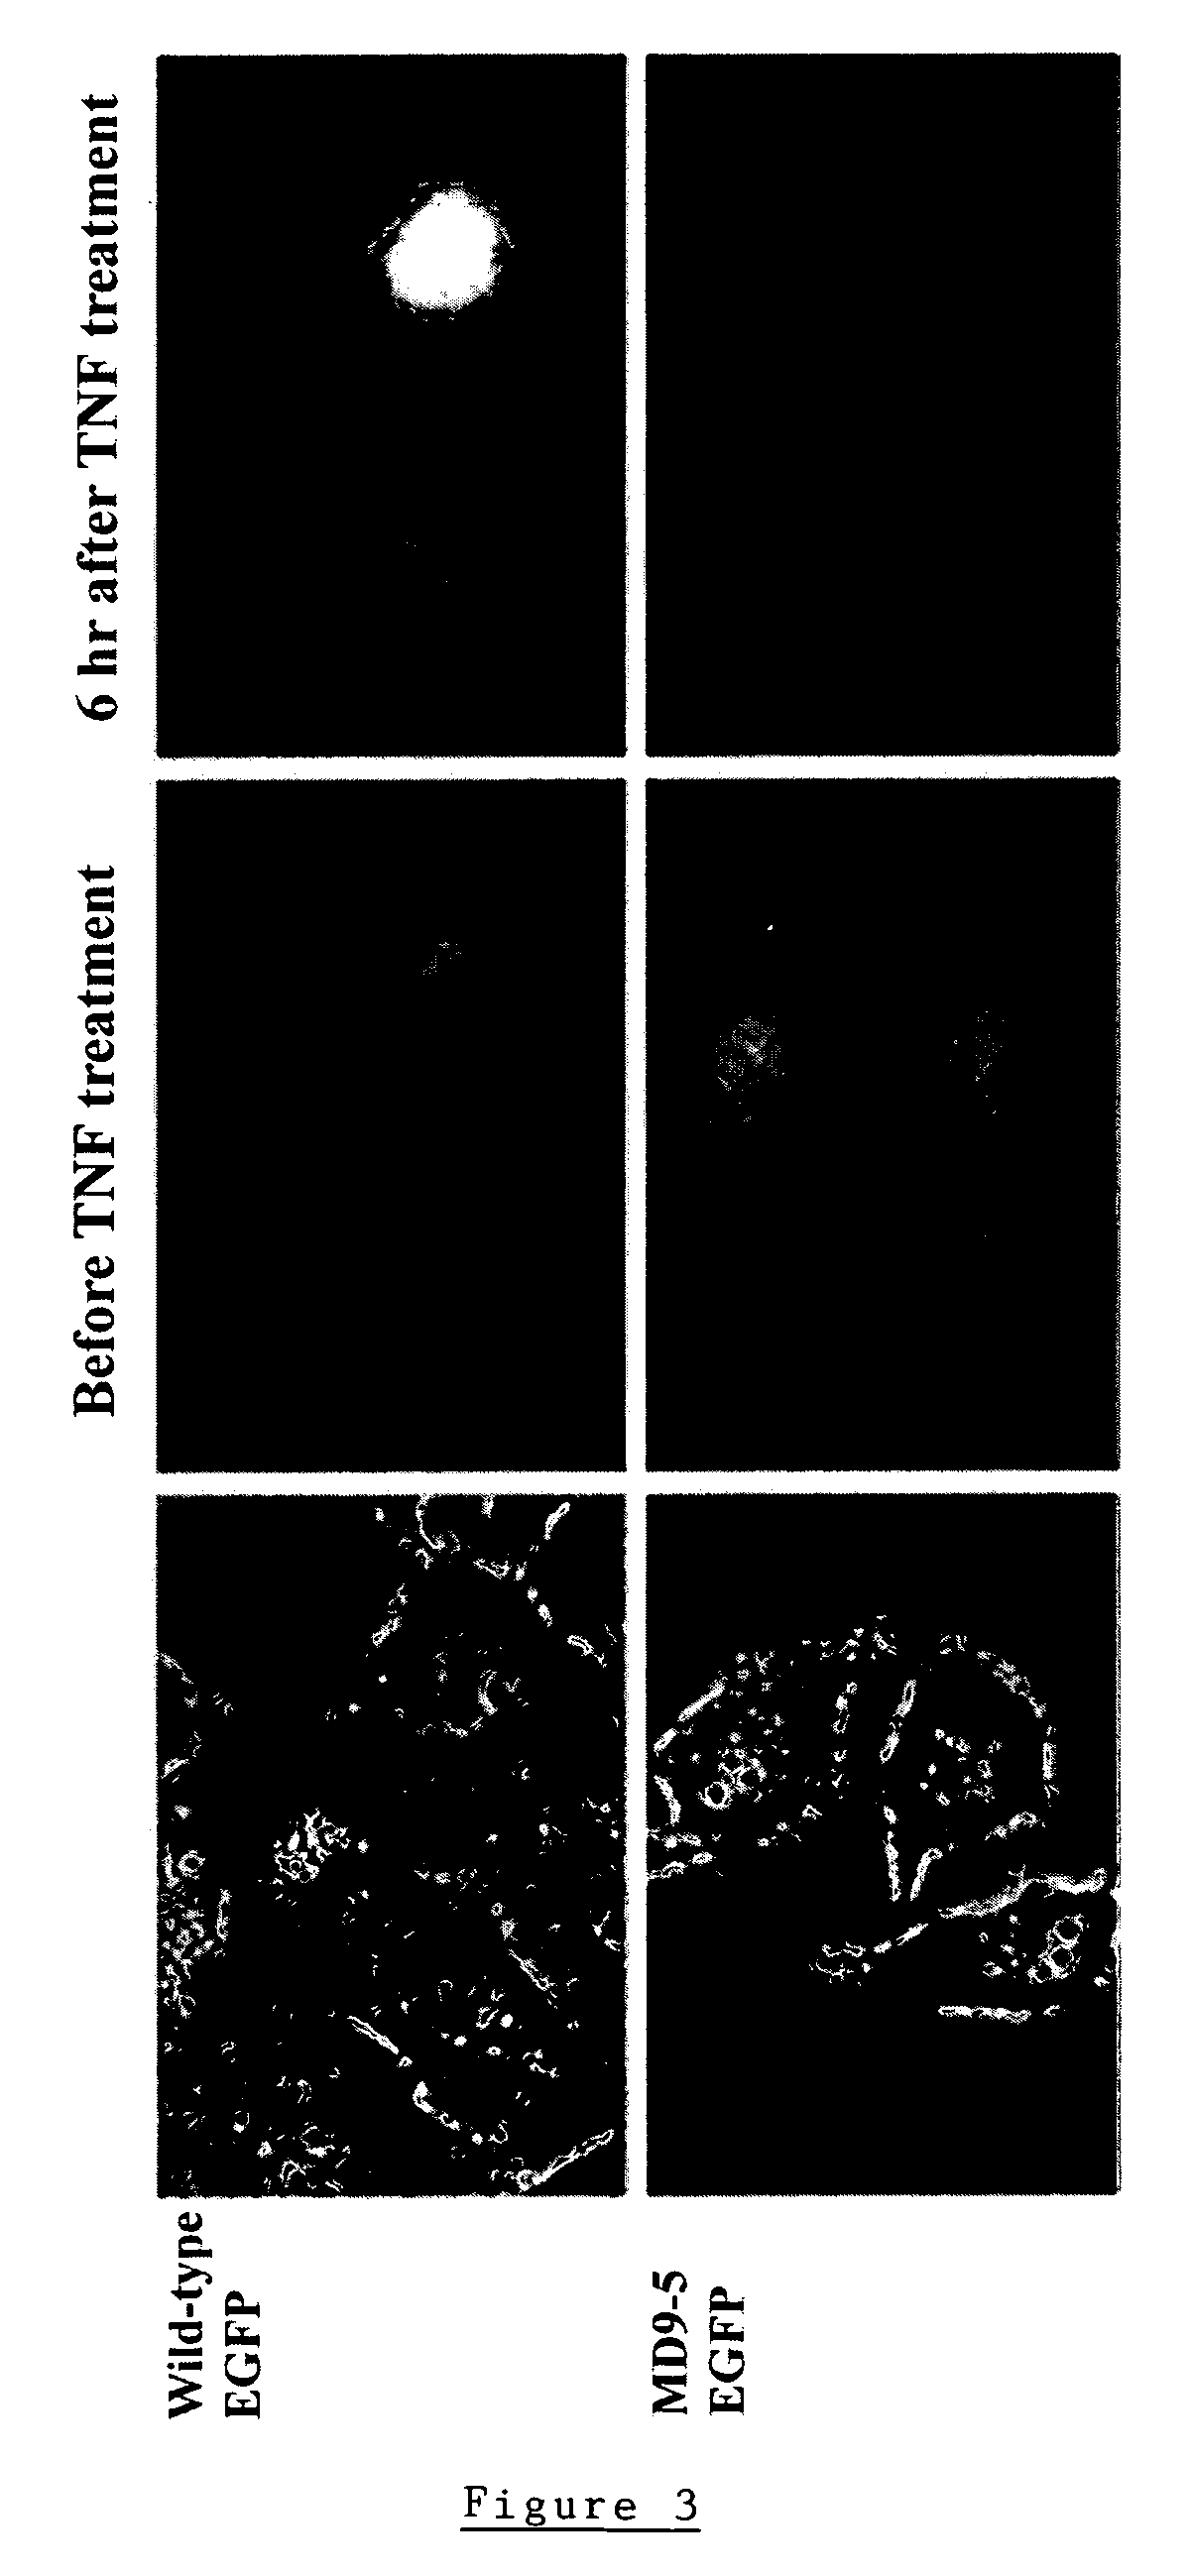 Modified fluorescent proteins for detecting protease activity